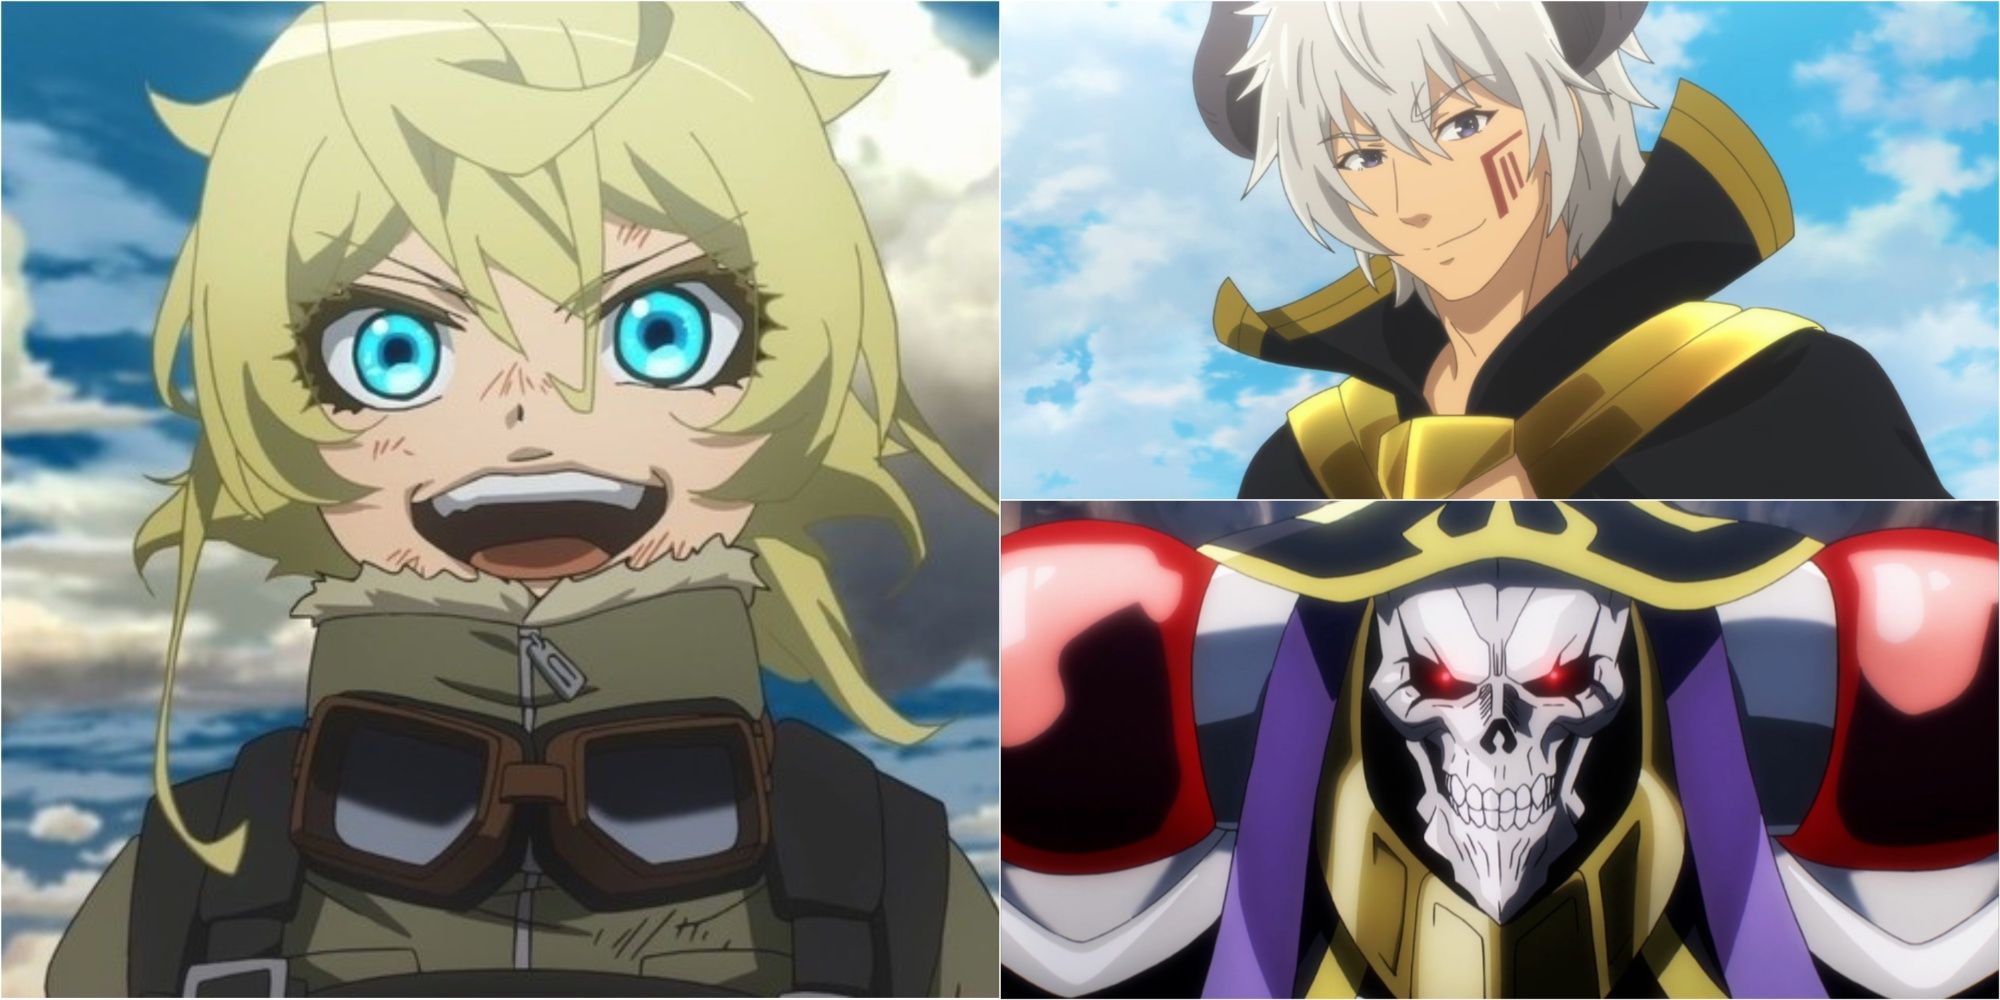 Strongest Mages In Isekai Anime featured image